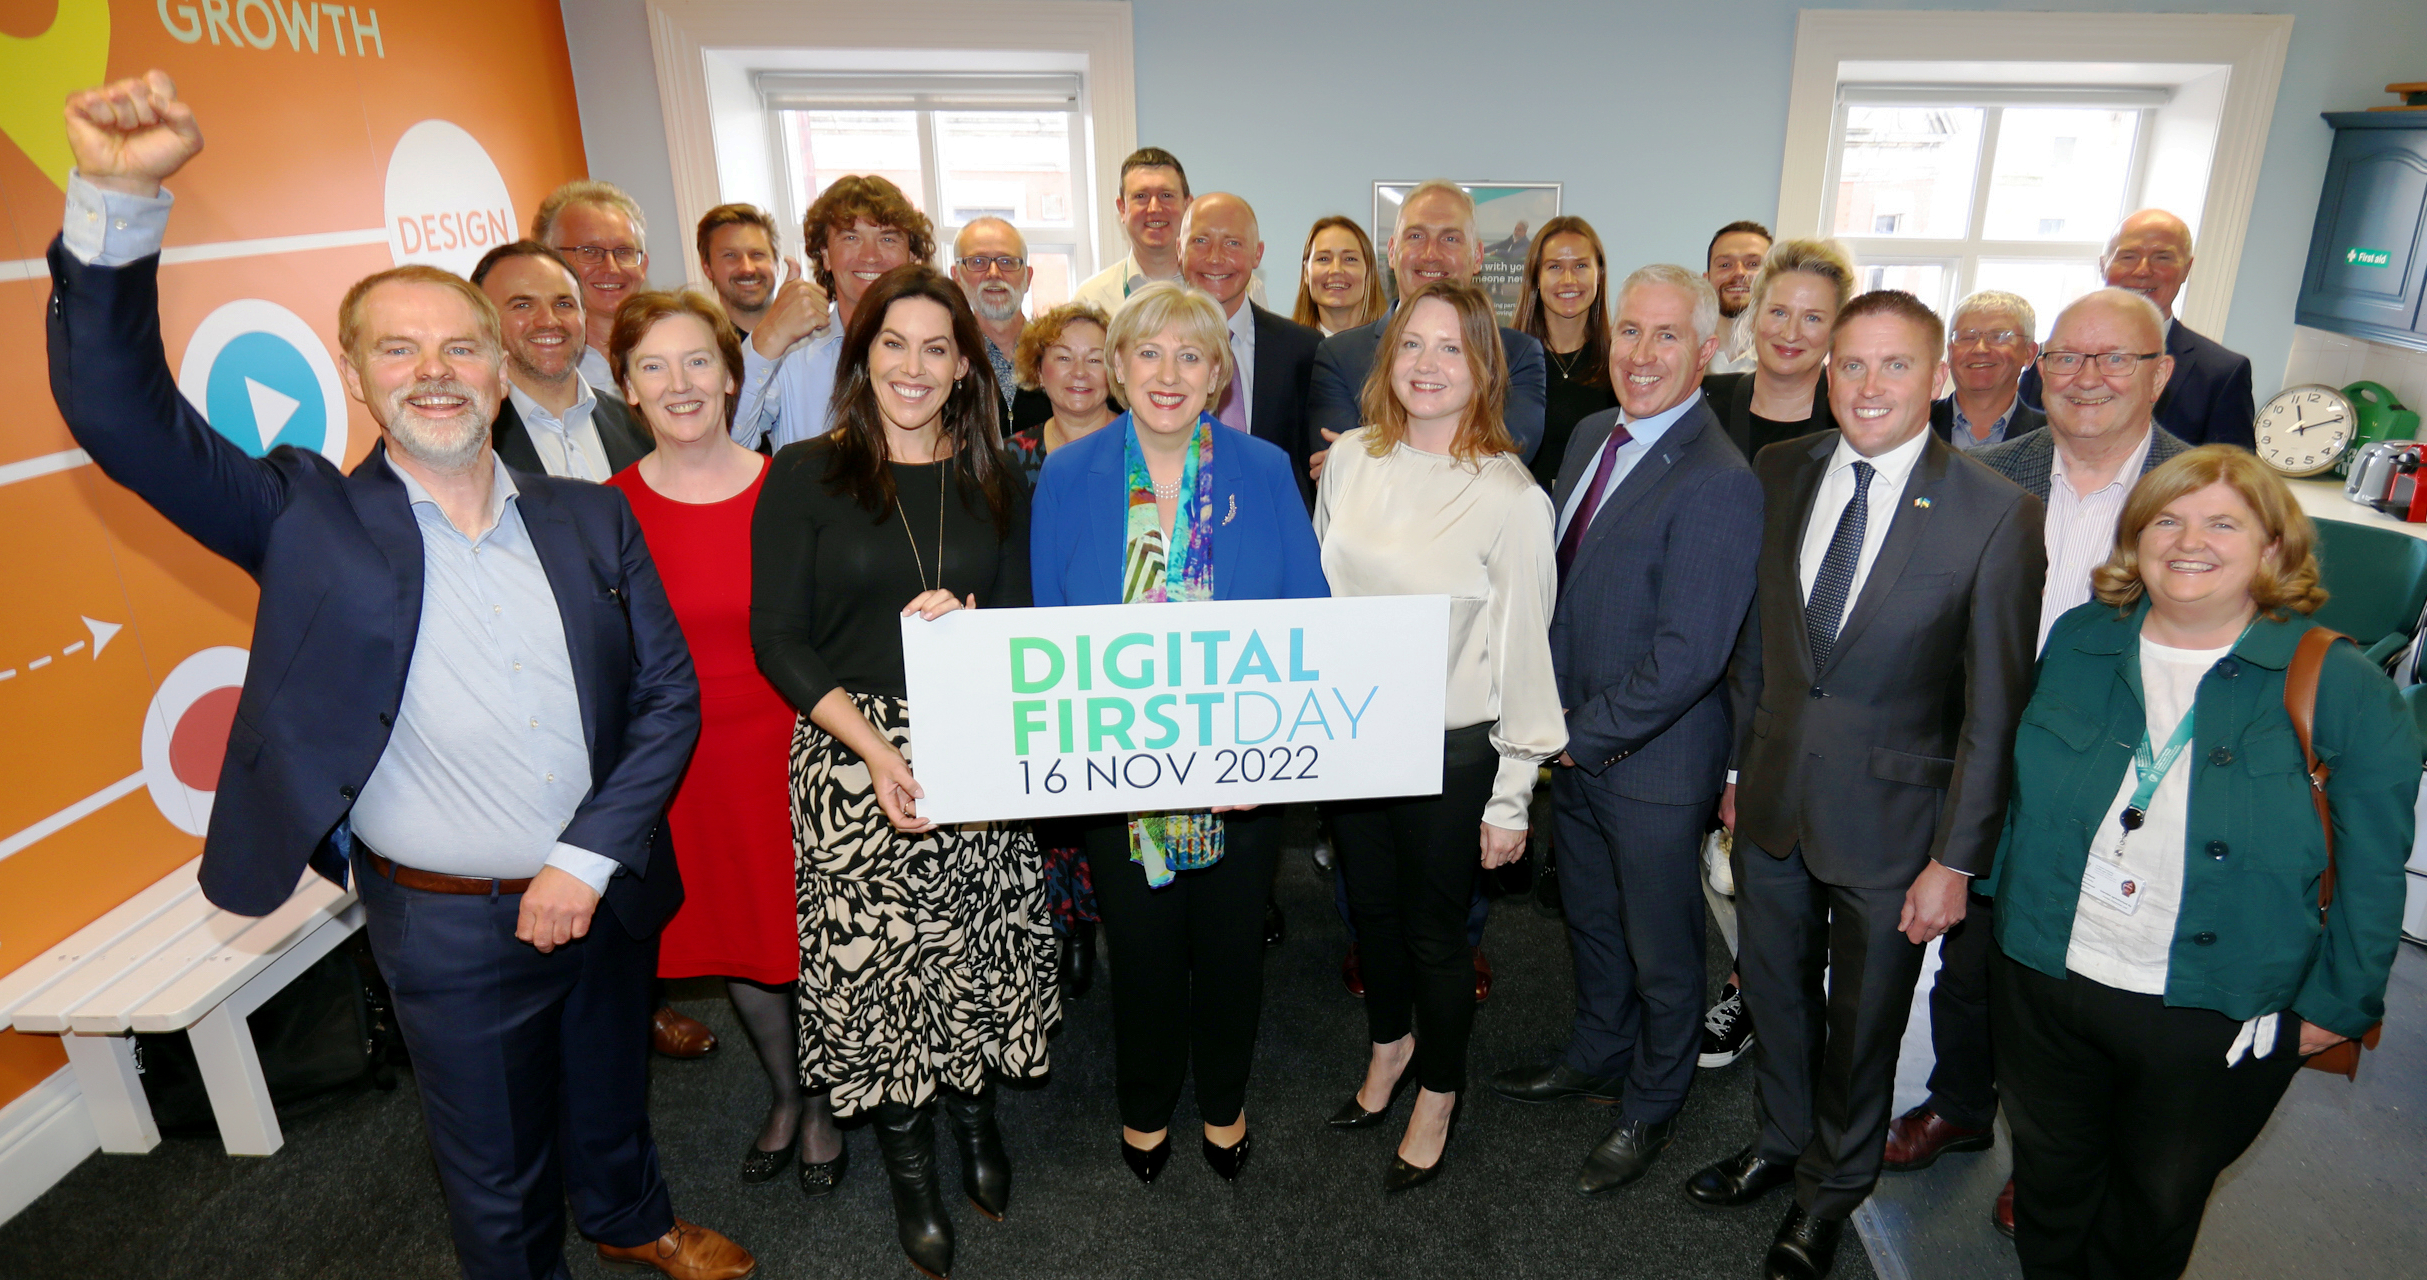 Irelands Digital First Day. Flagship Events Revealed From The Tip of Donegal to the Toe of Kerry